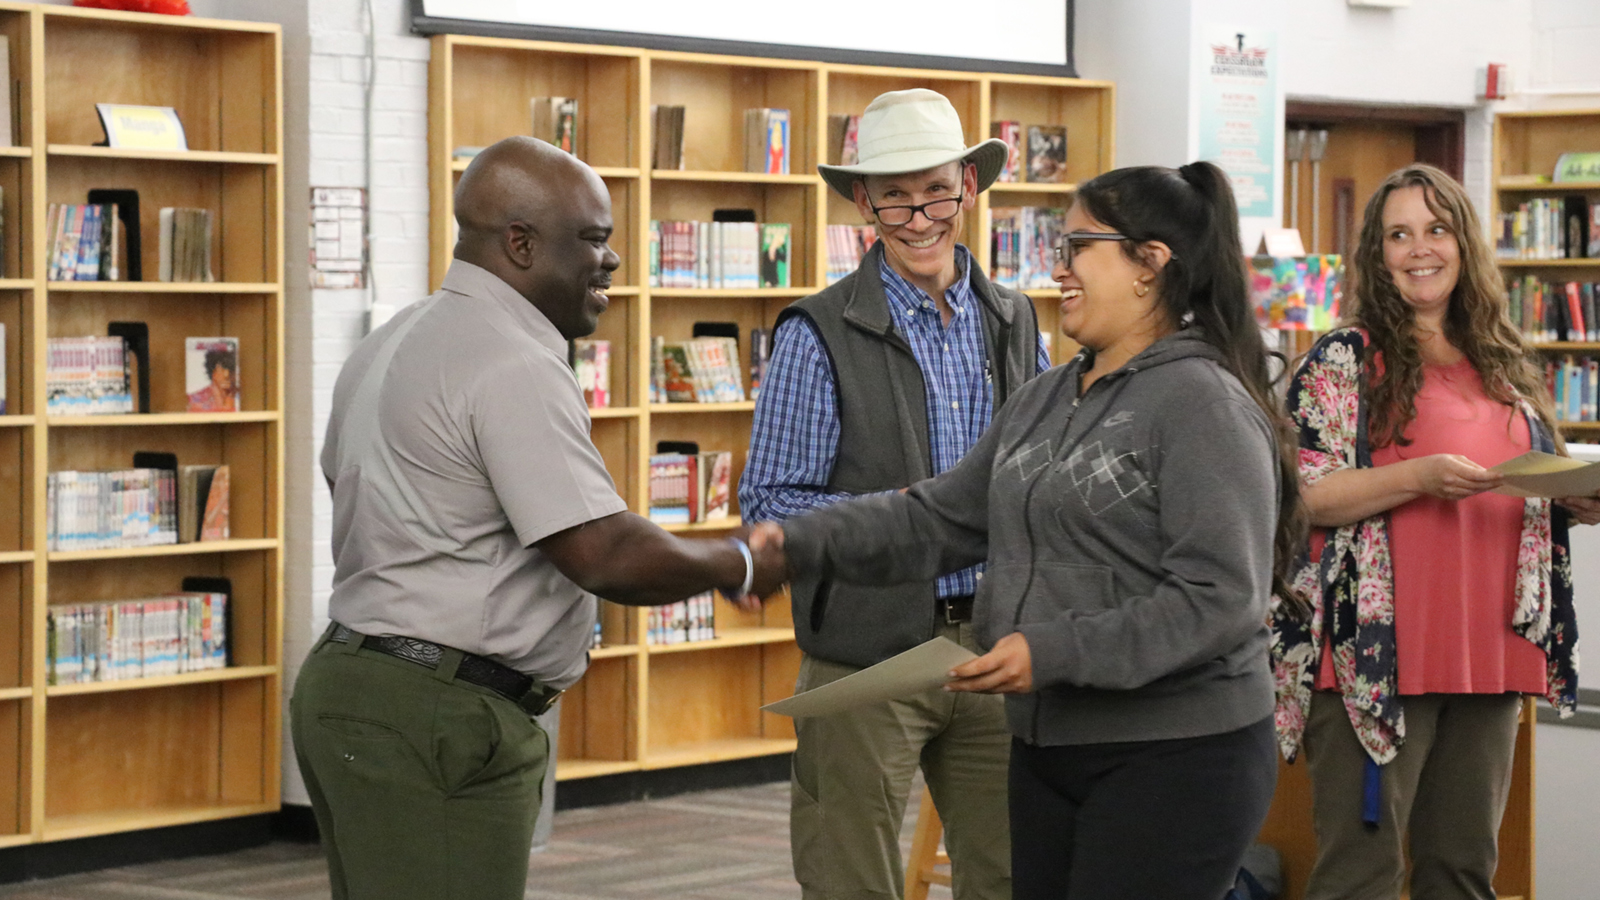 Gabriela Sanchez Benitez shakes hands with Great Smoky Mountains National Park Superintendent Cassius Cash. Also pictured: John DiDiego, Tremont Education Director, and Kimberly Kennard, Fulton High School Teacher.